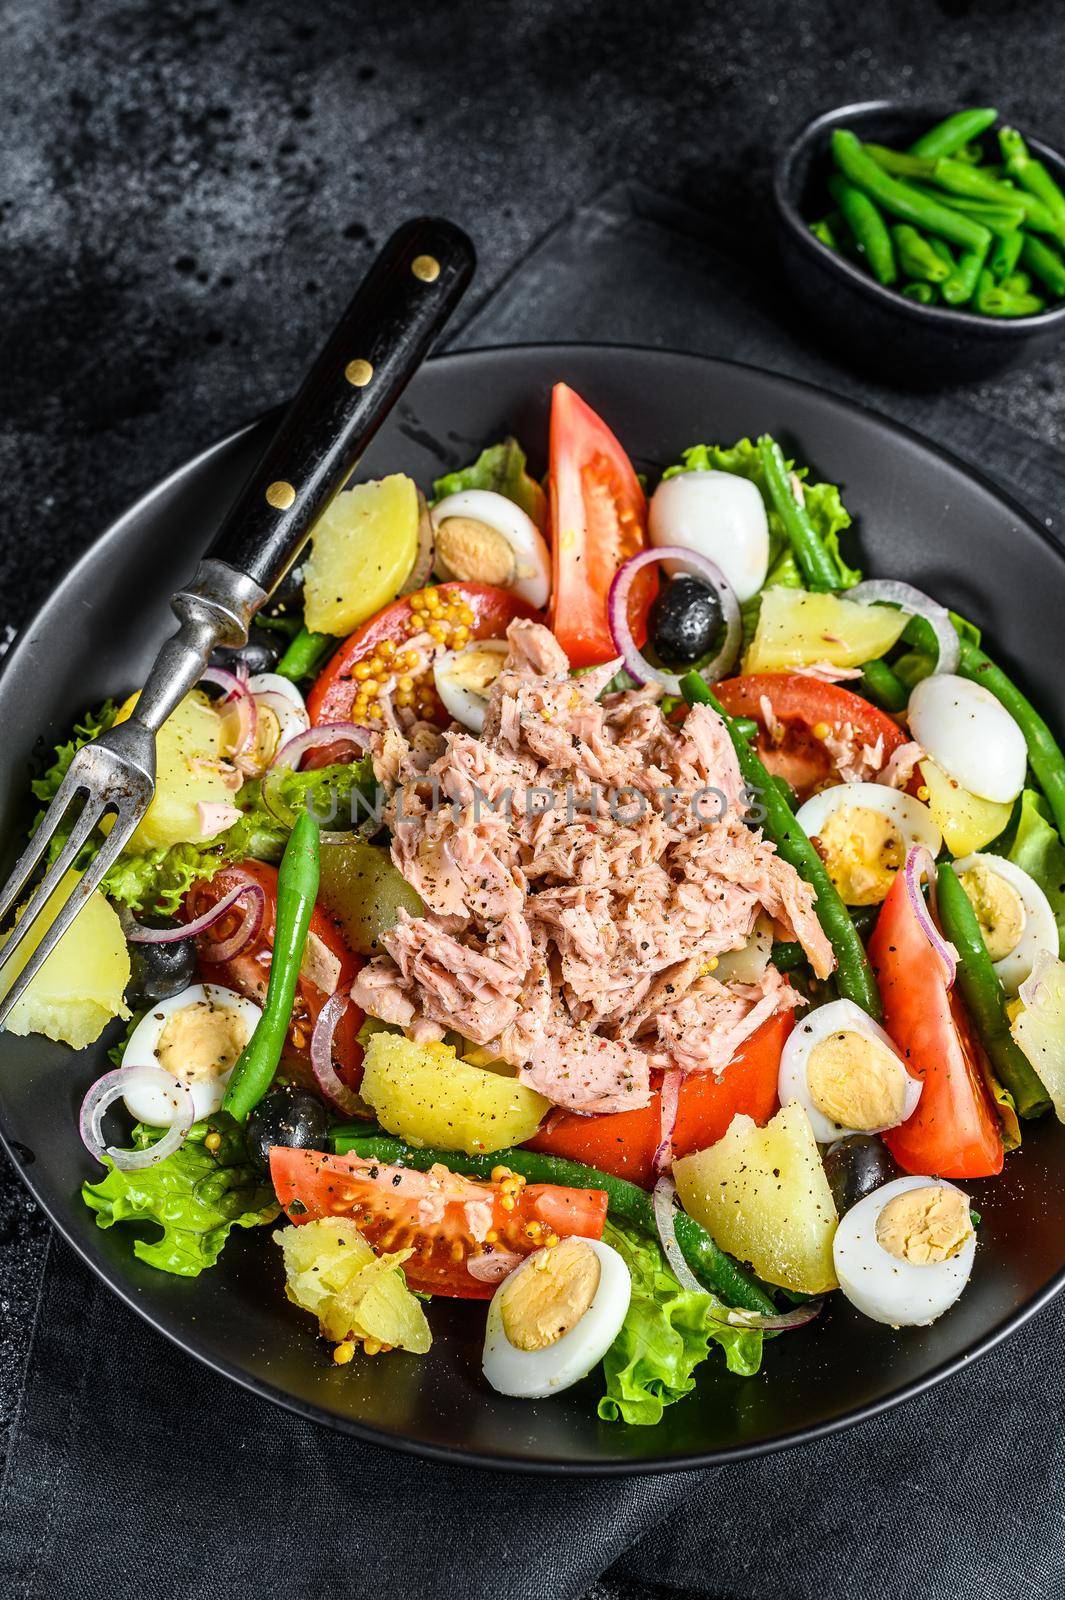 Tuna salad nicoise with vegetables, eggs and anchovies in a plate. Black background. top view.